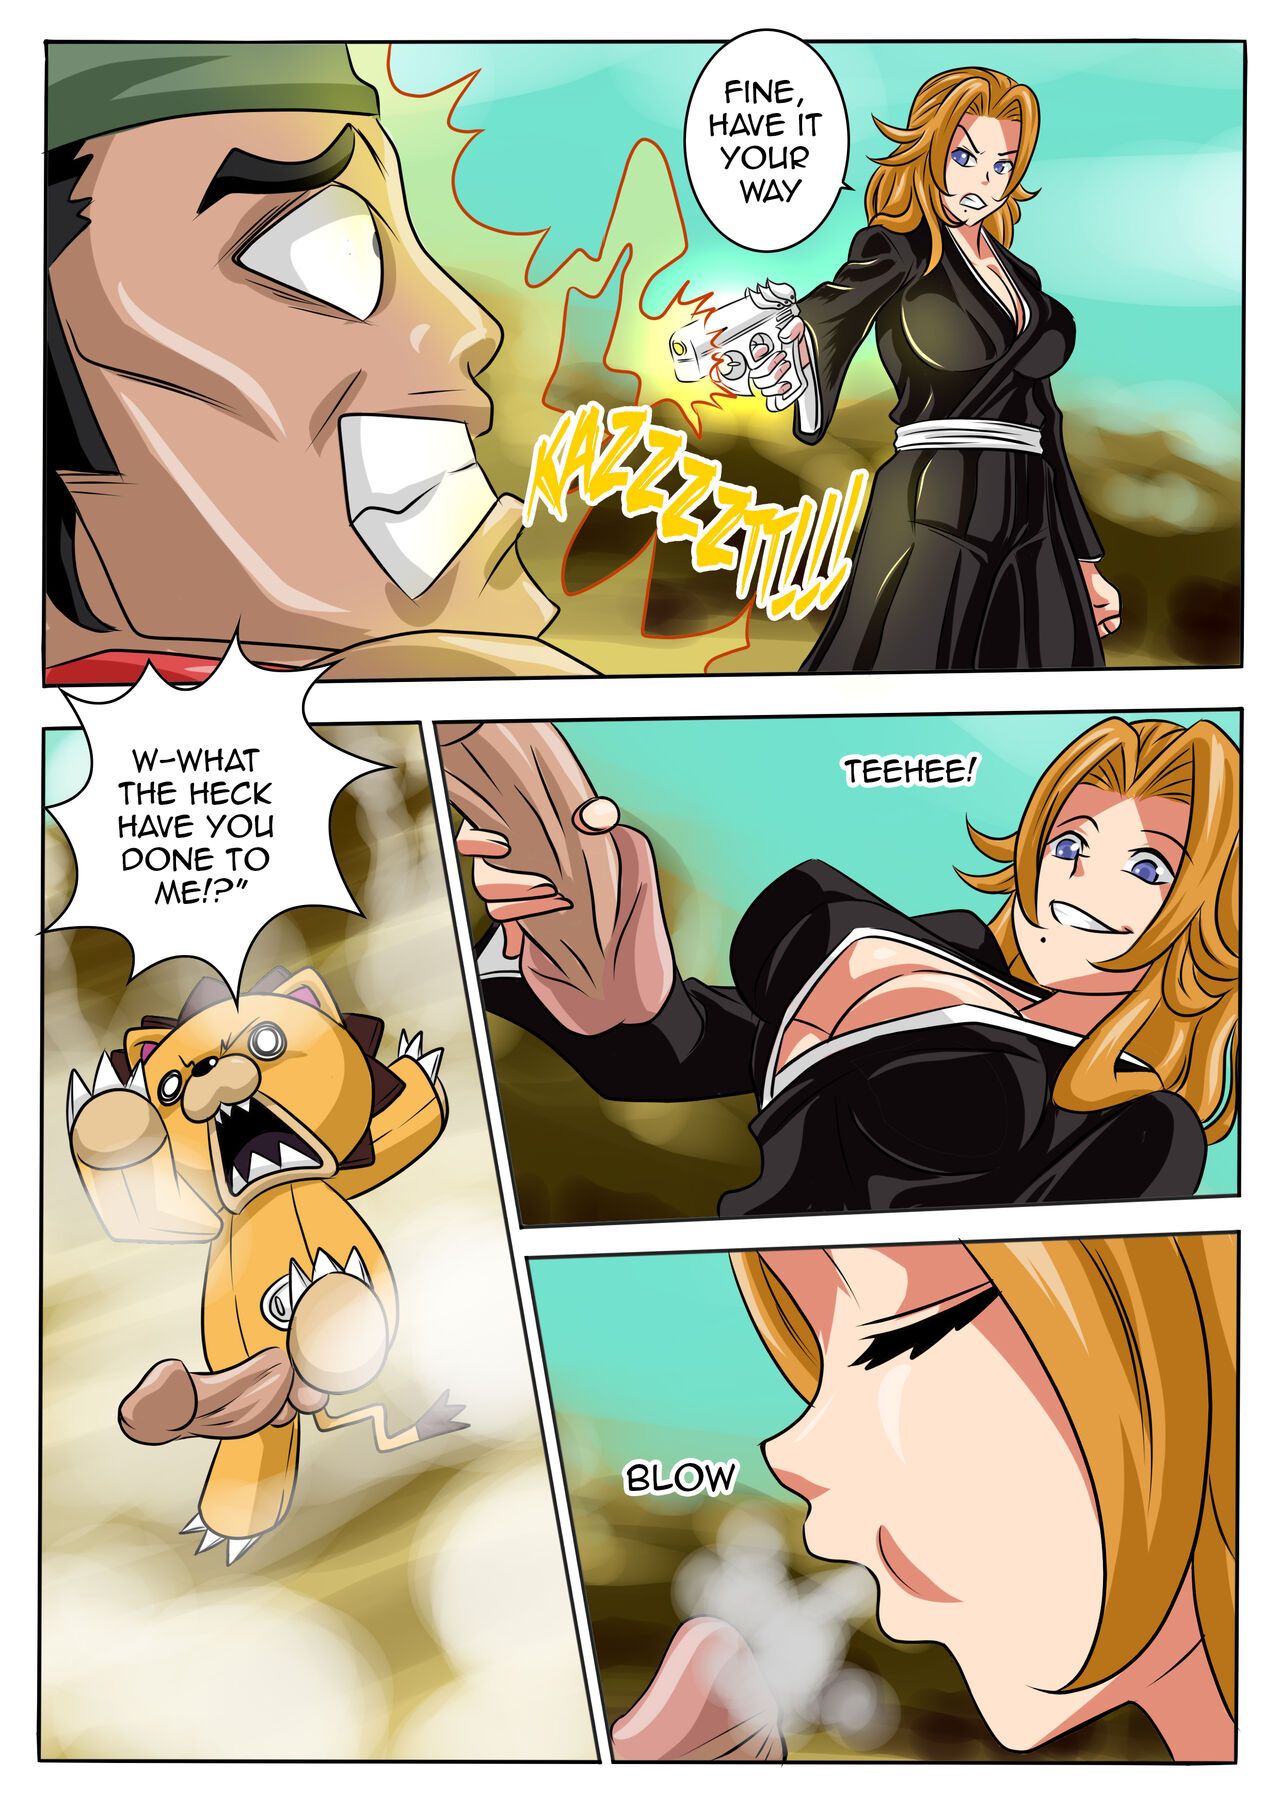 Bleach: A What If Story Part 6 Porn Comic english 12